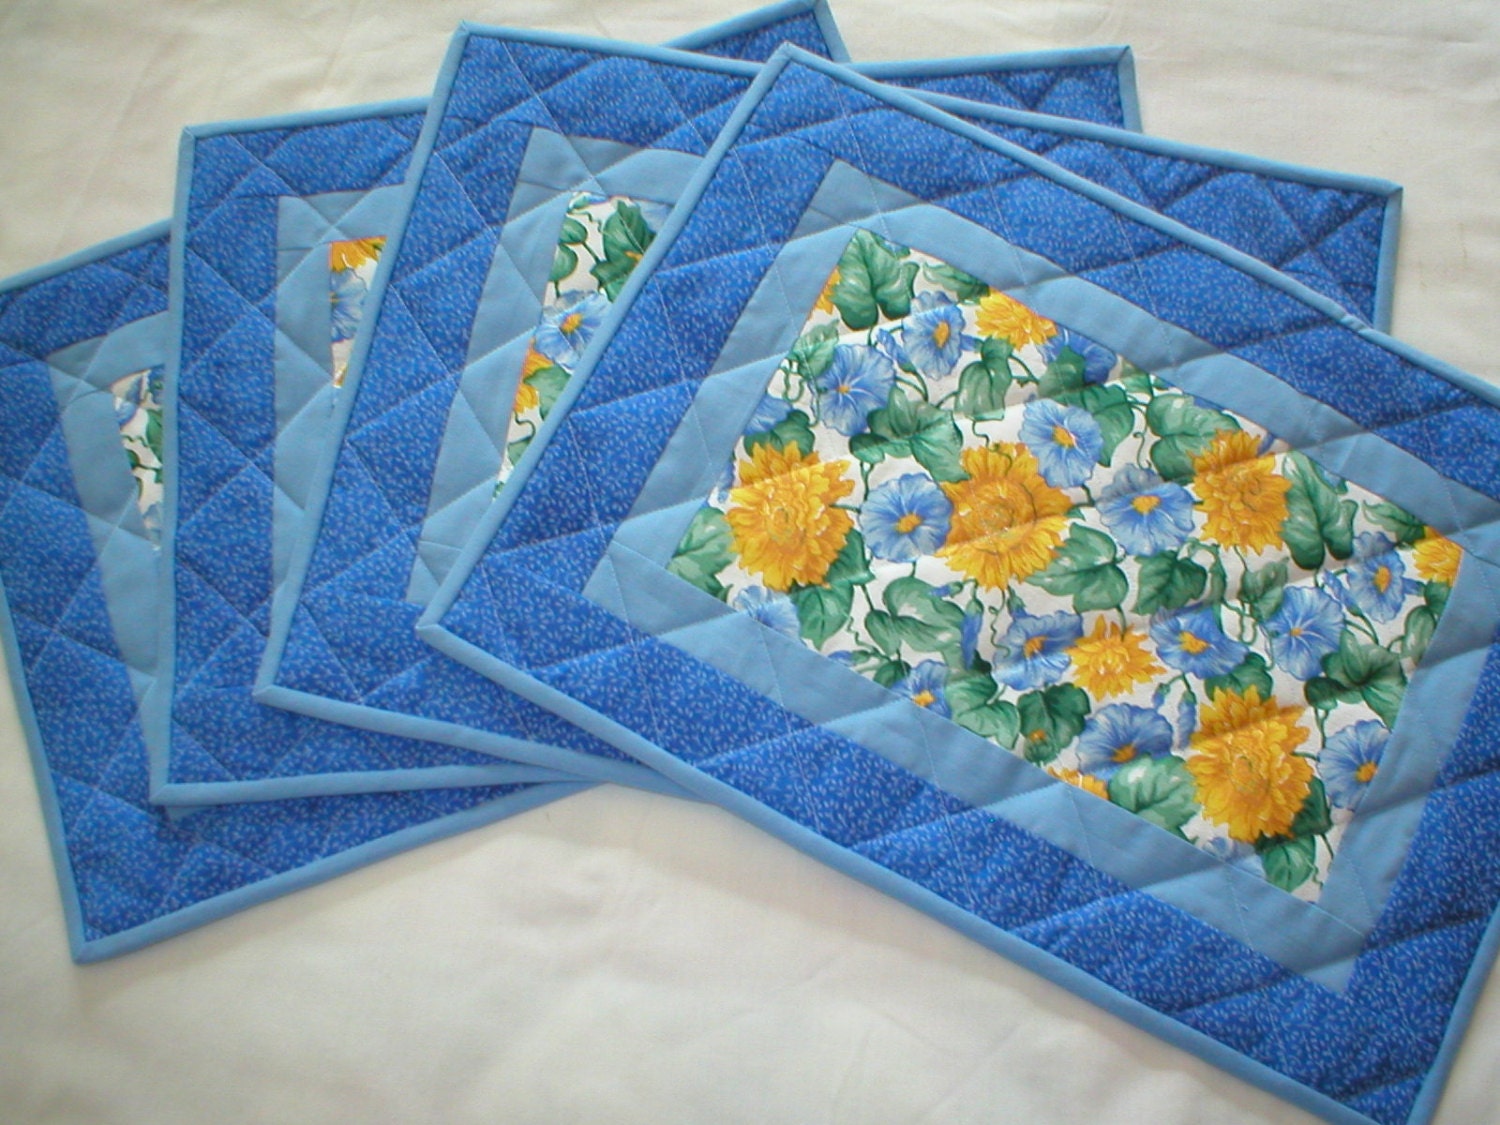 Quilted Placemats with Morning Glories and Sunflowers